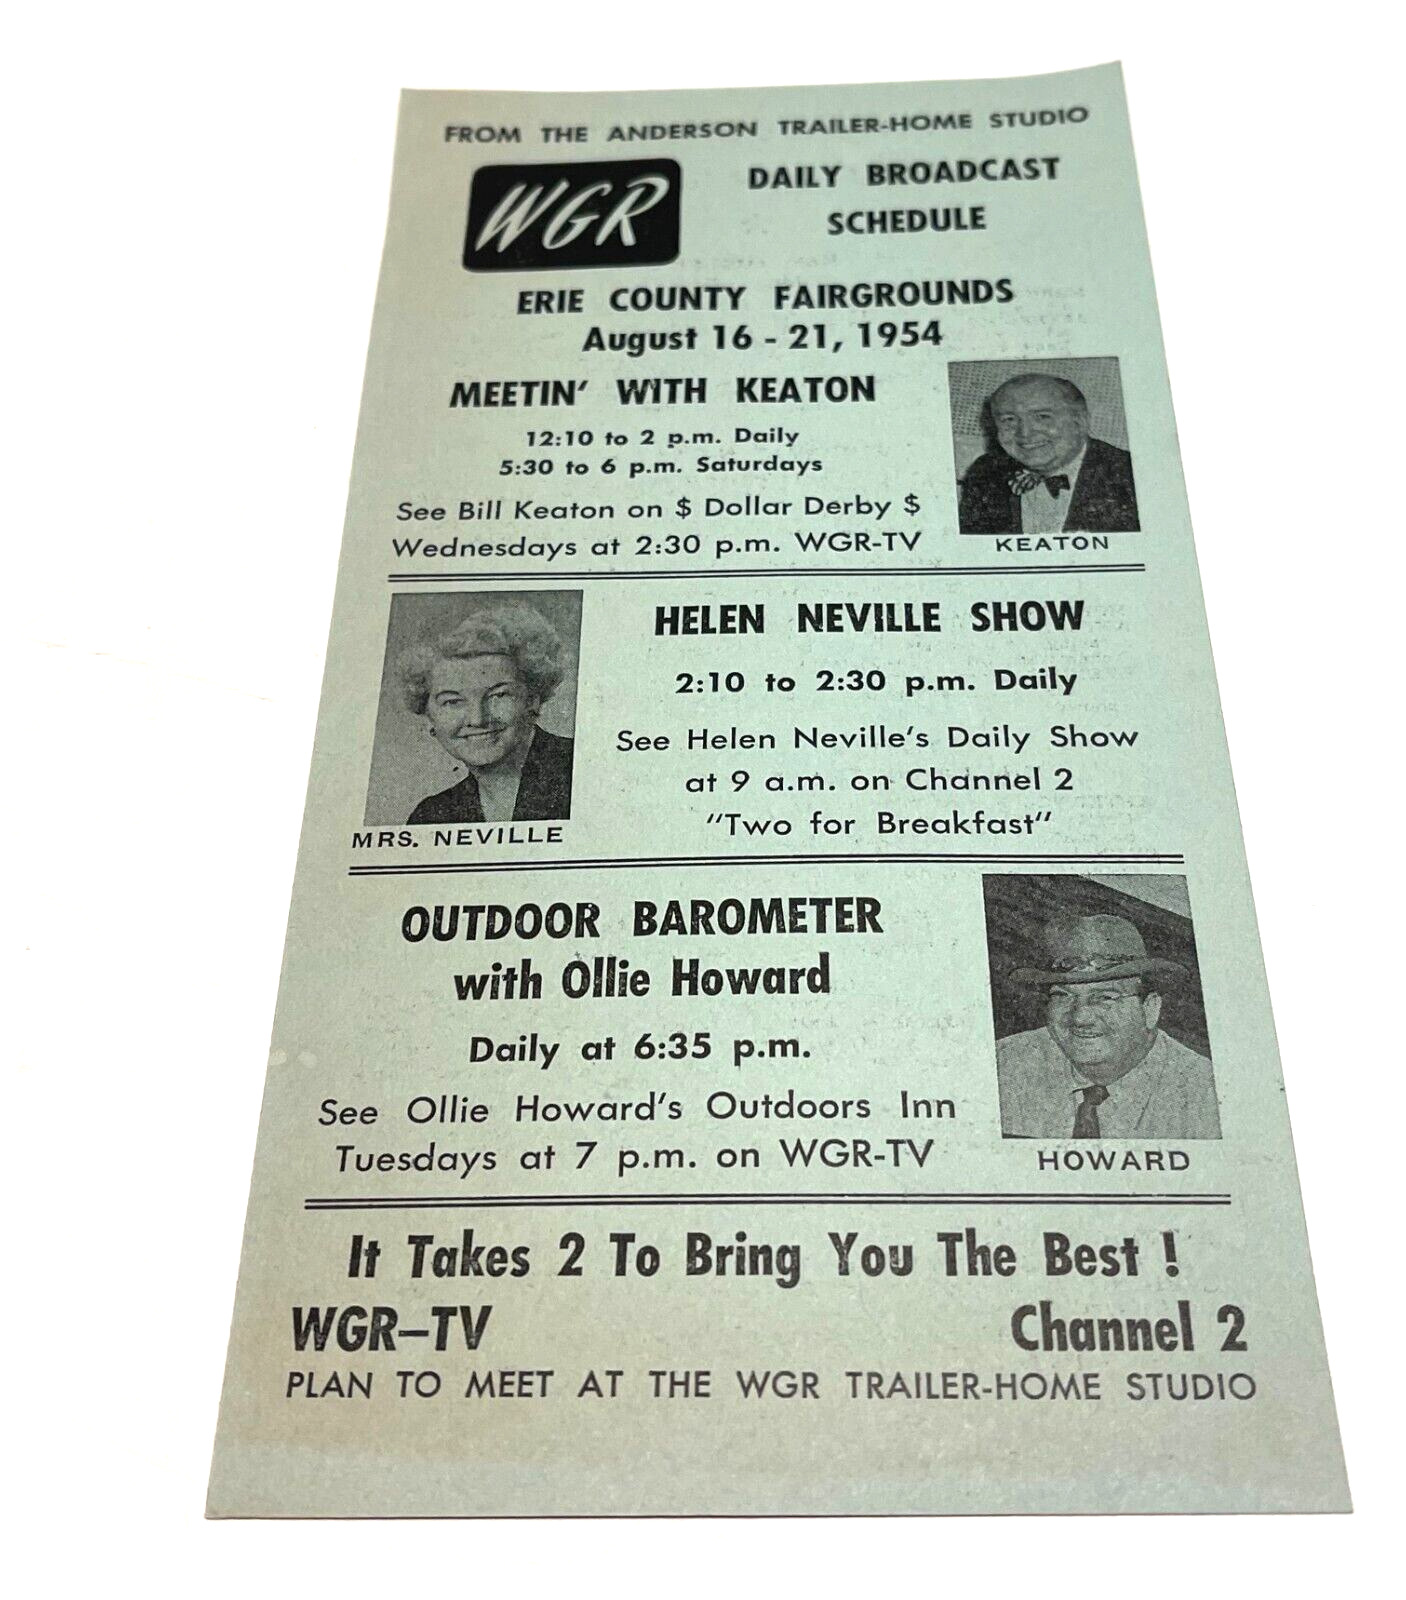 1954 ERIE COUNTY FAIR WGR DAILY BROADCAST SCHEDULE HAMBURG, NY